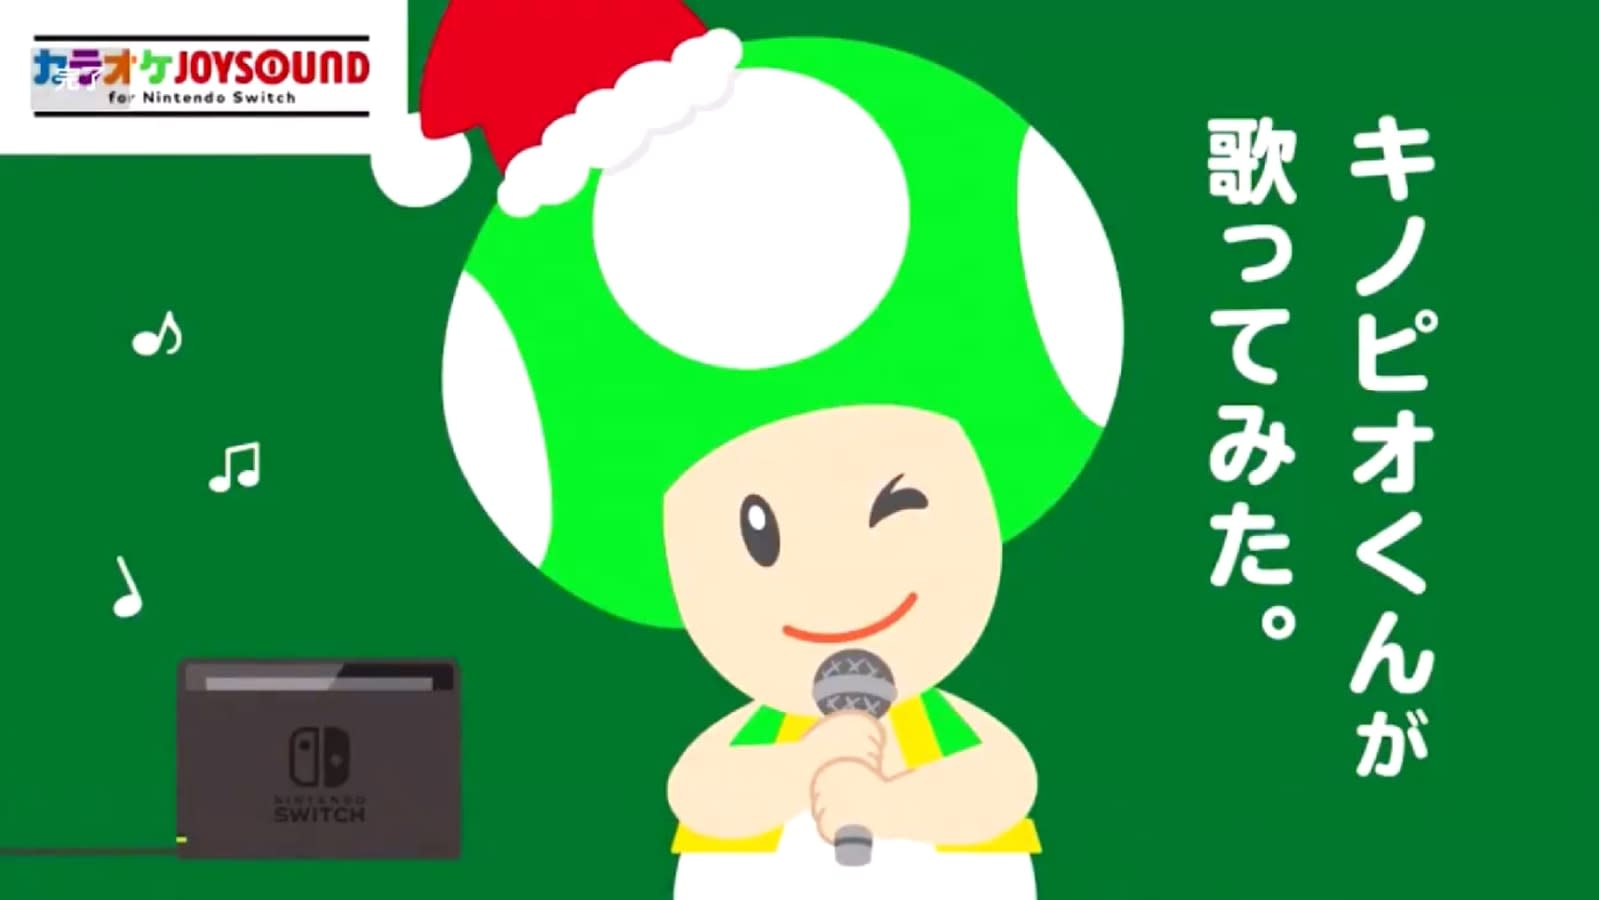 Nintendo Sends Toad To Ruin Your Christmas With A Terrible Carol Engadget